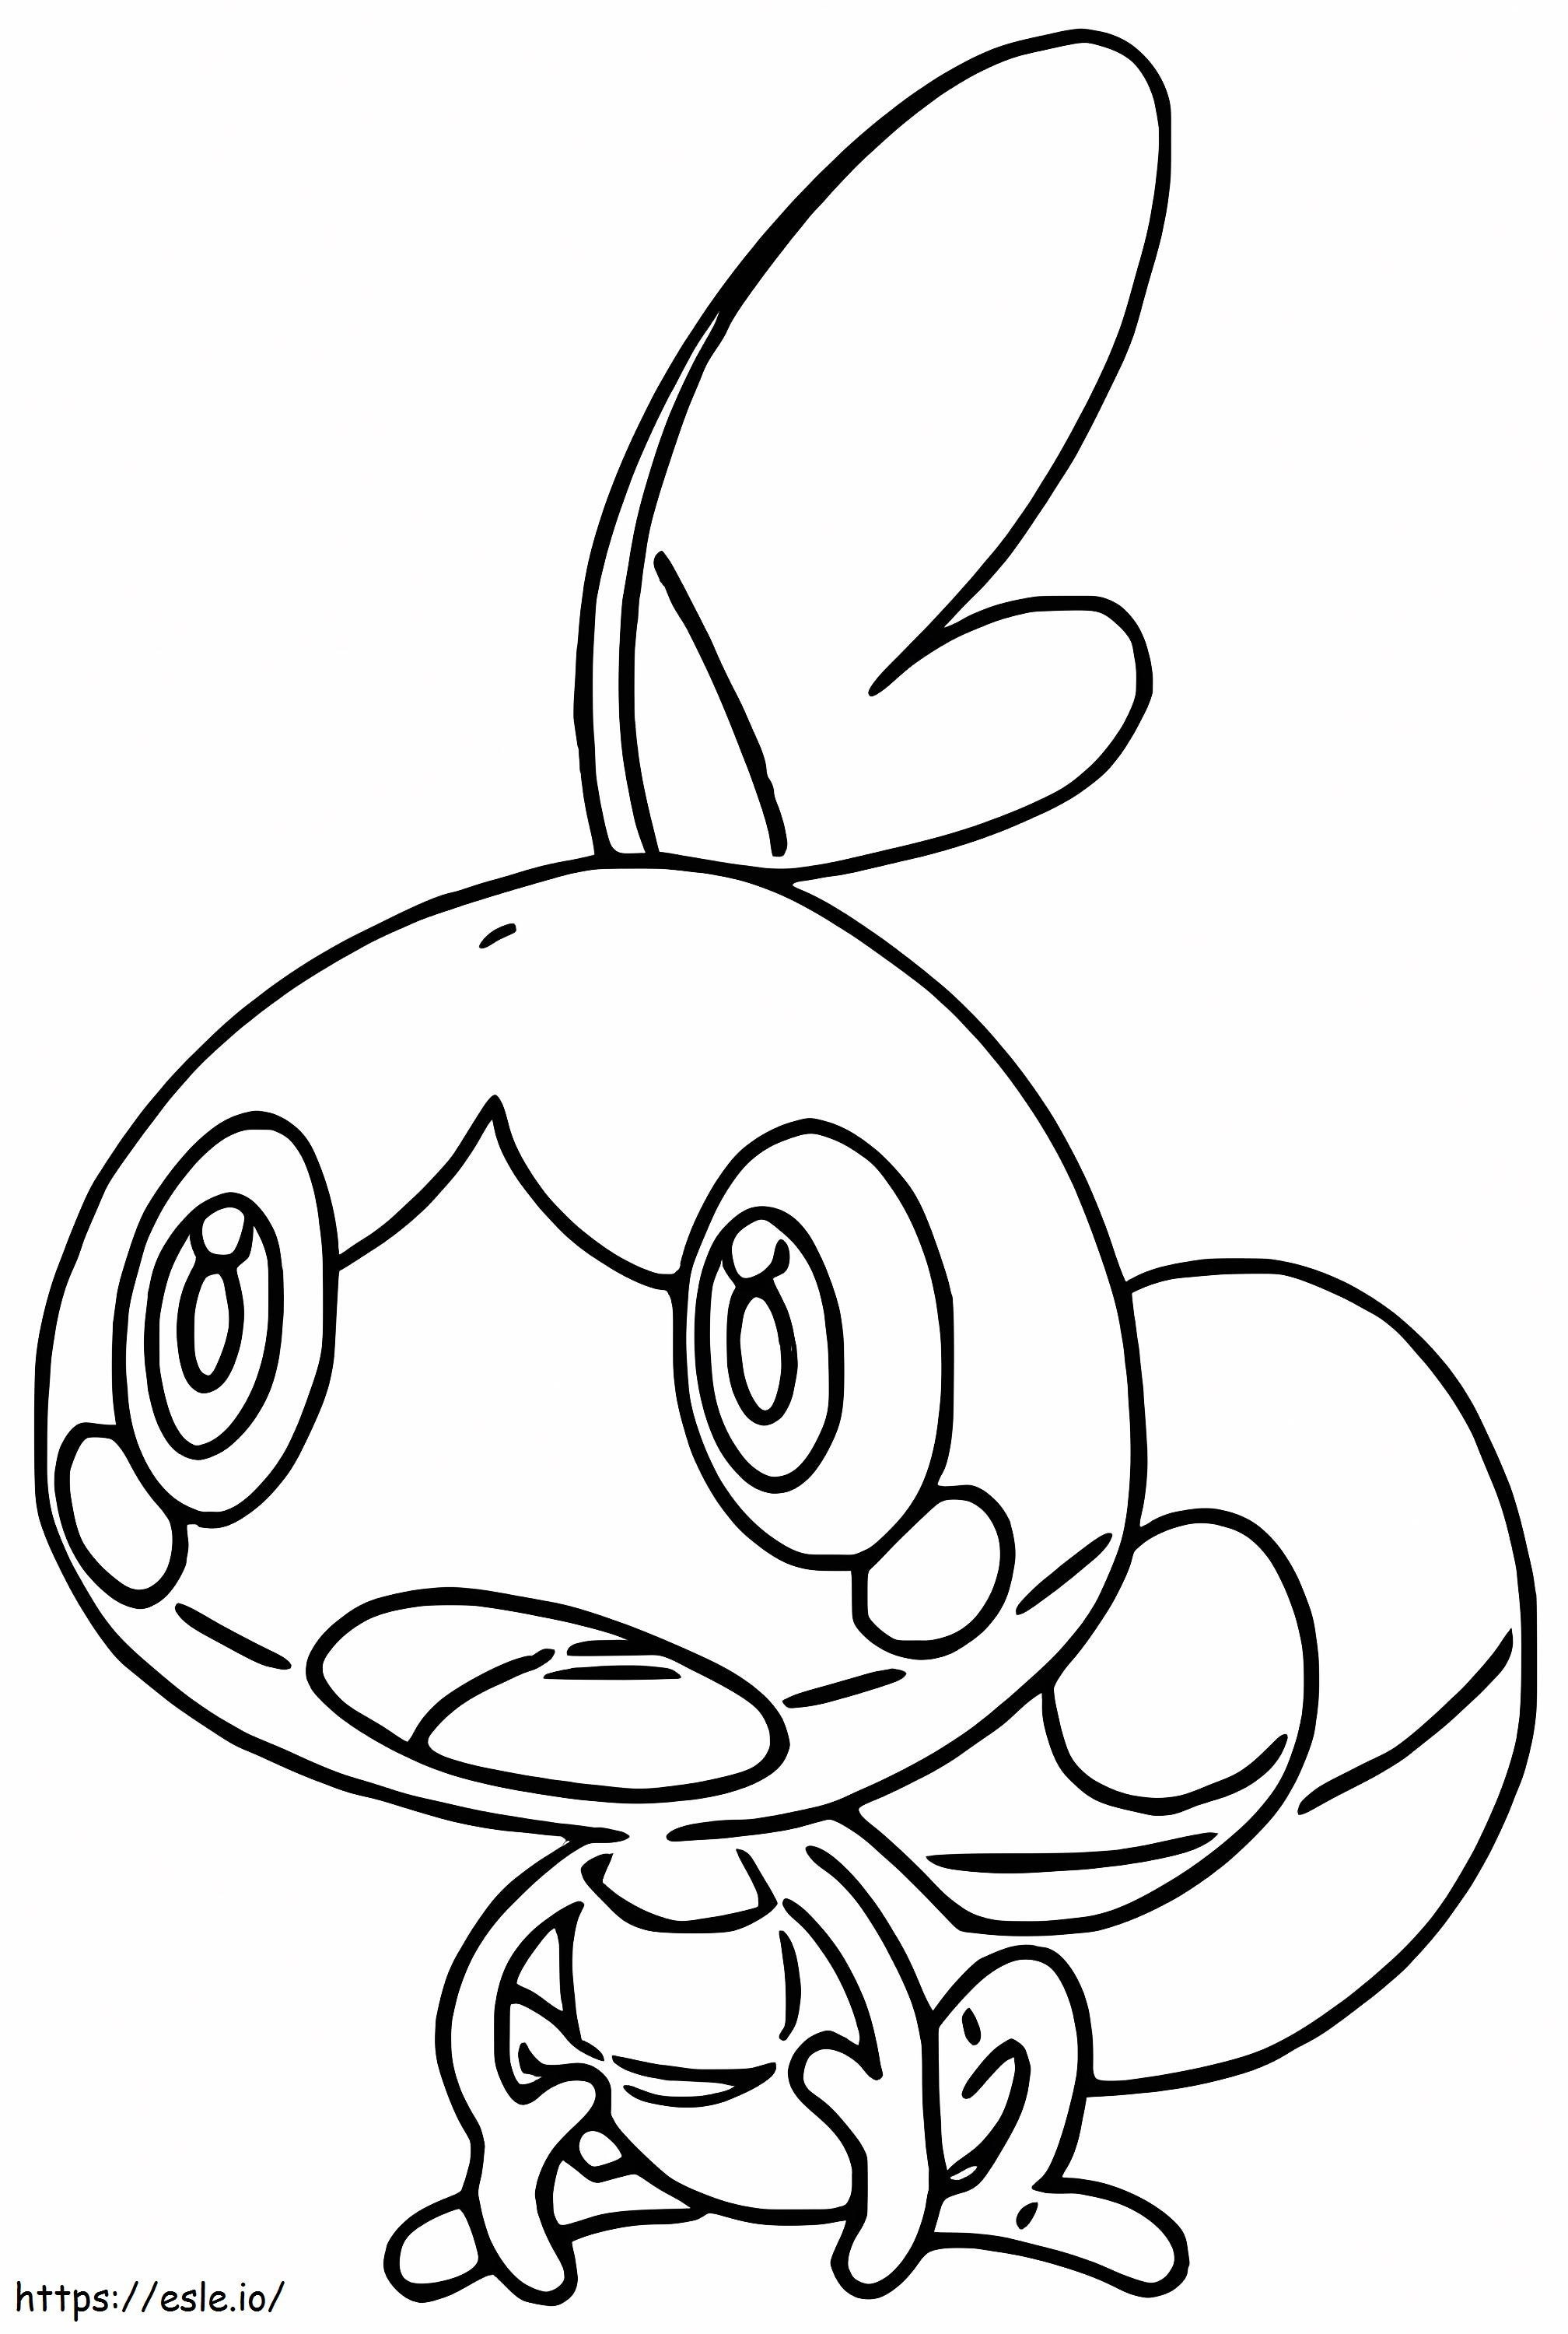 Sobble 1 coloring page